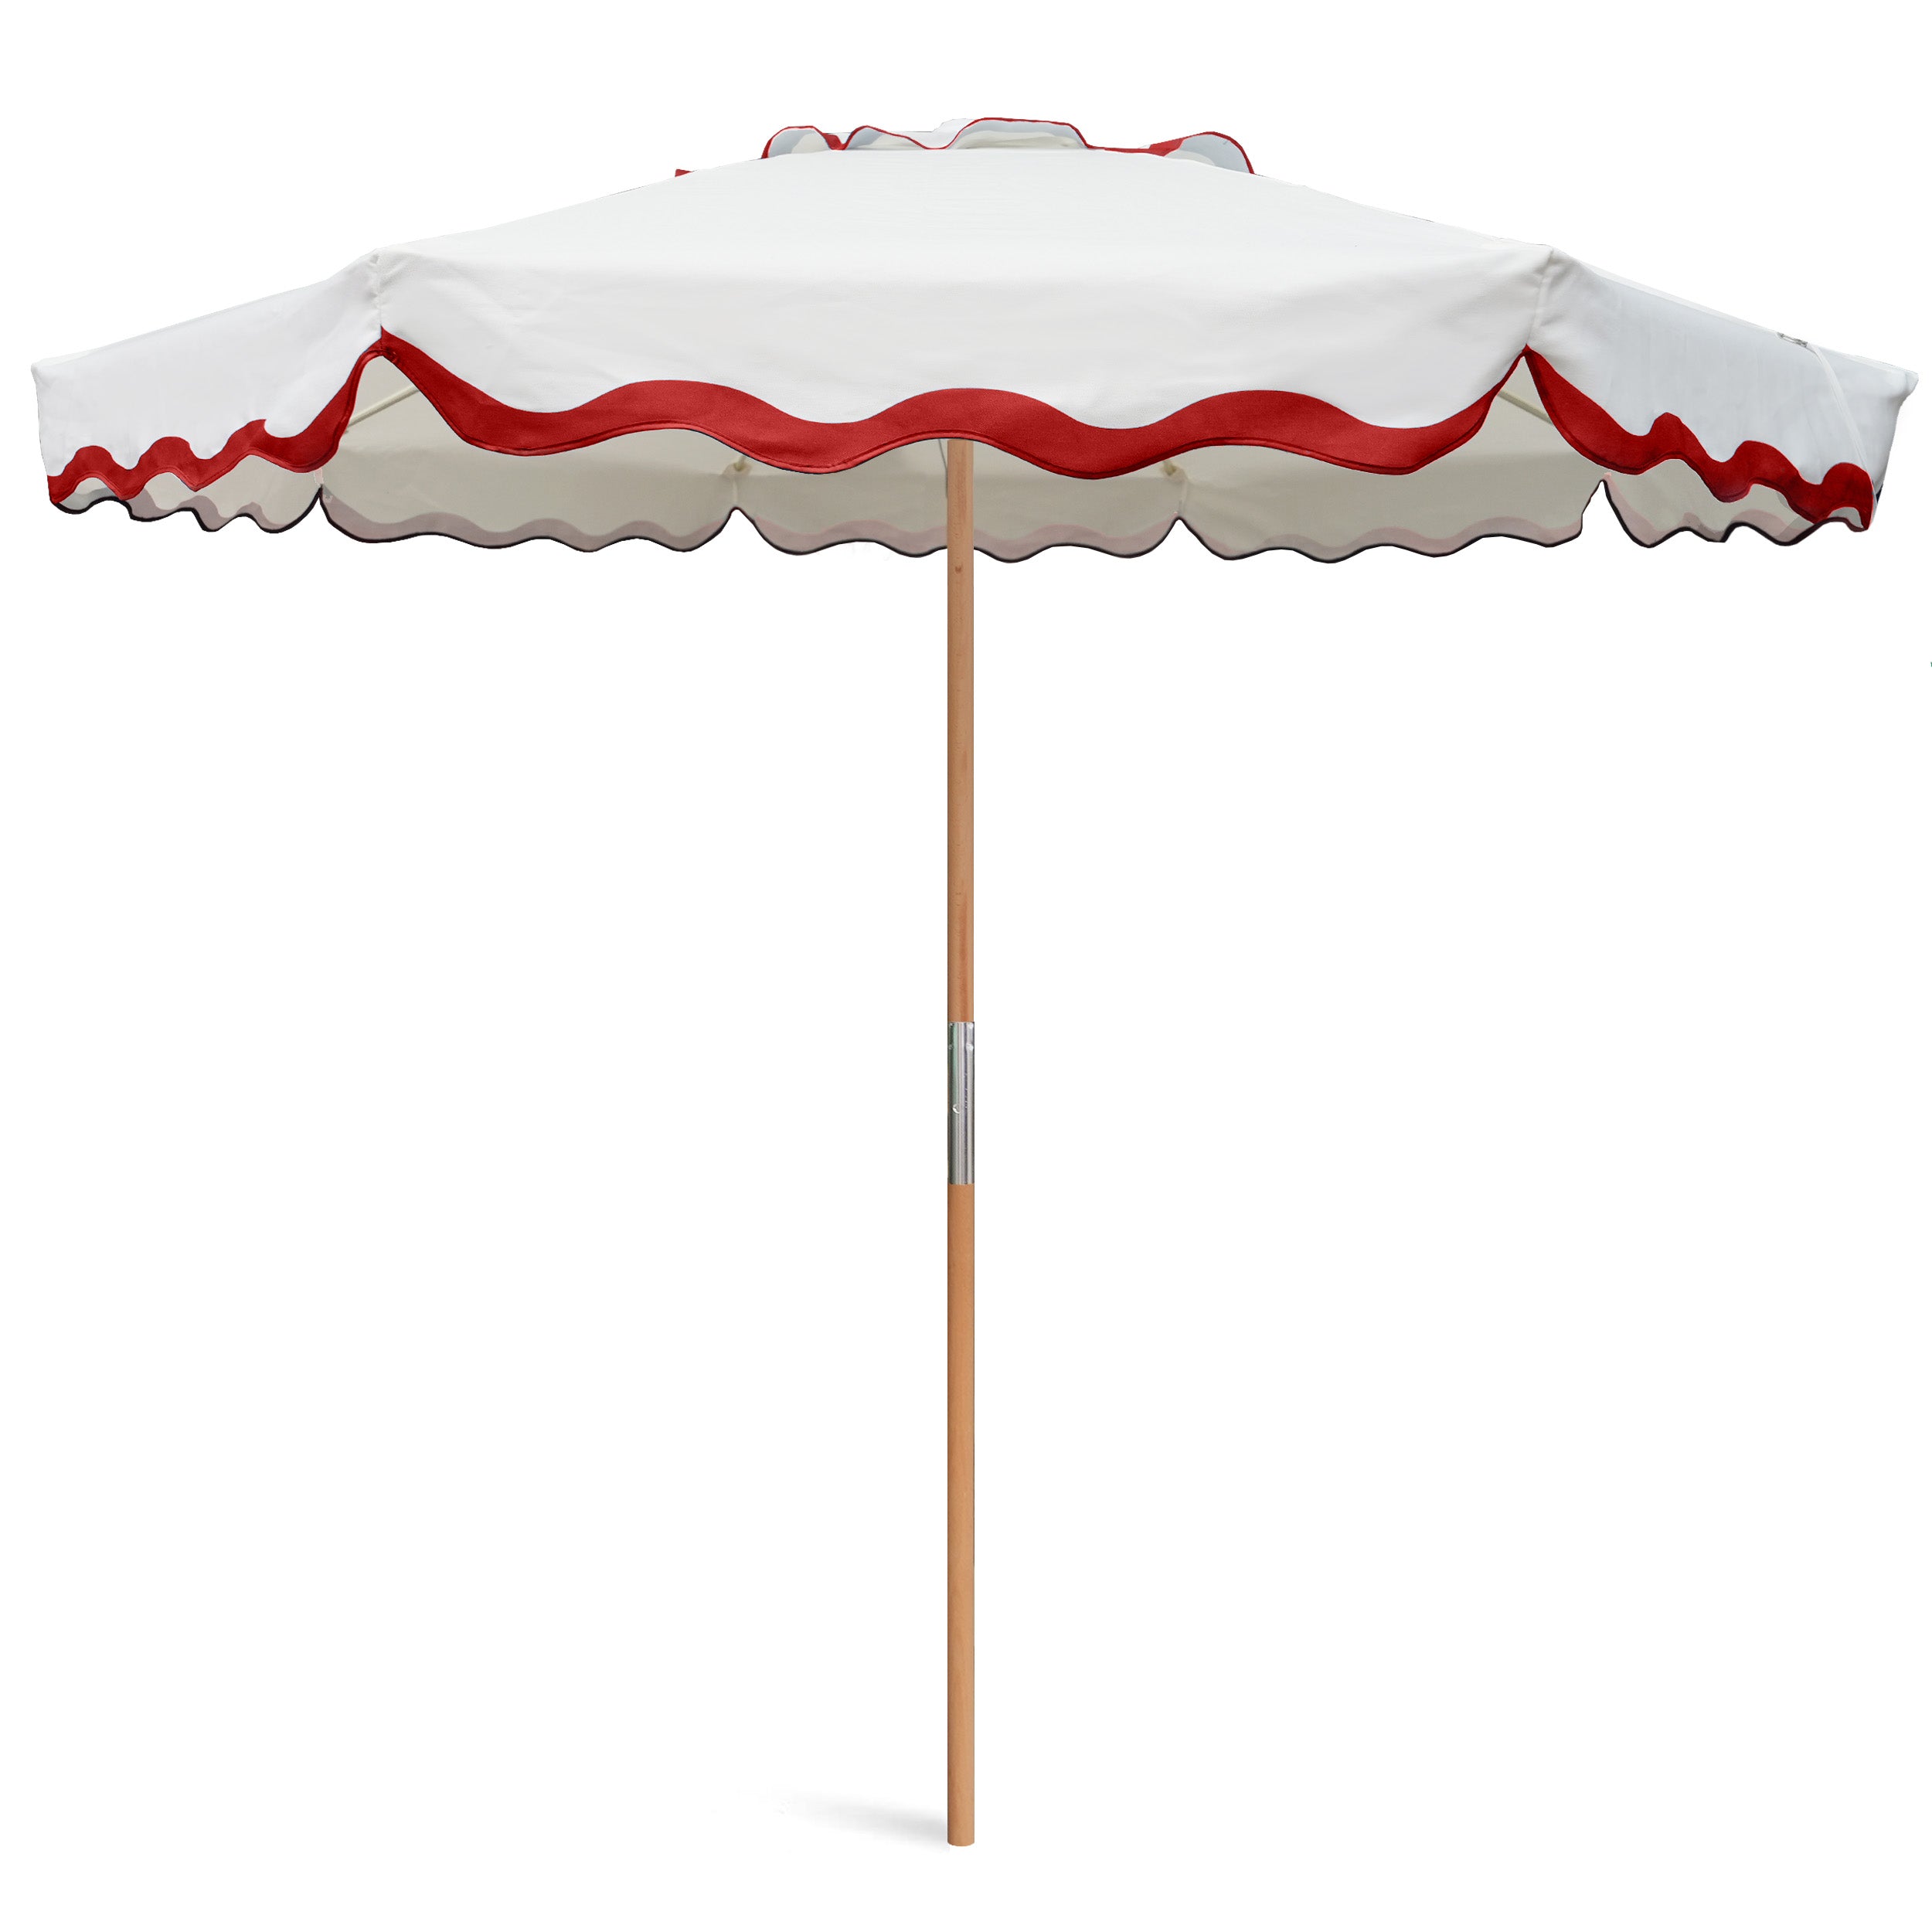 AMMSUN 7.8ft Beach & Patio Umbrella with red flaps white